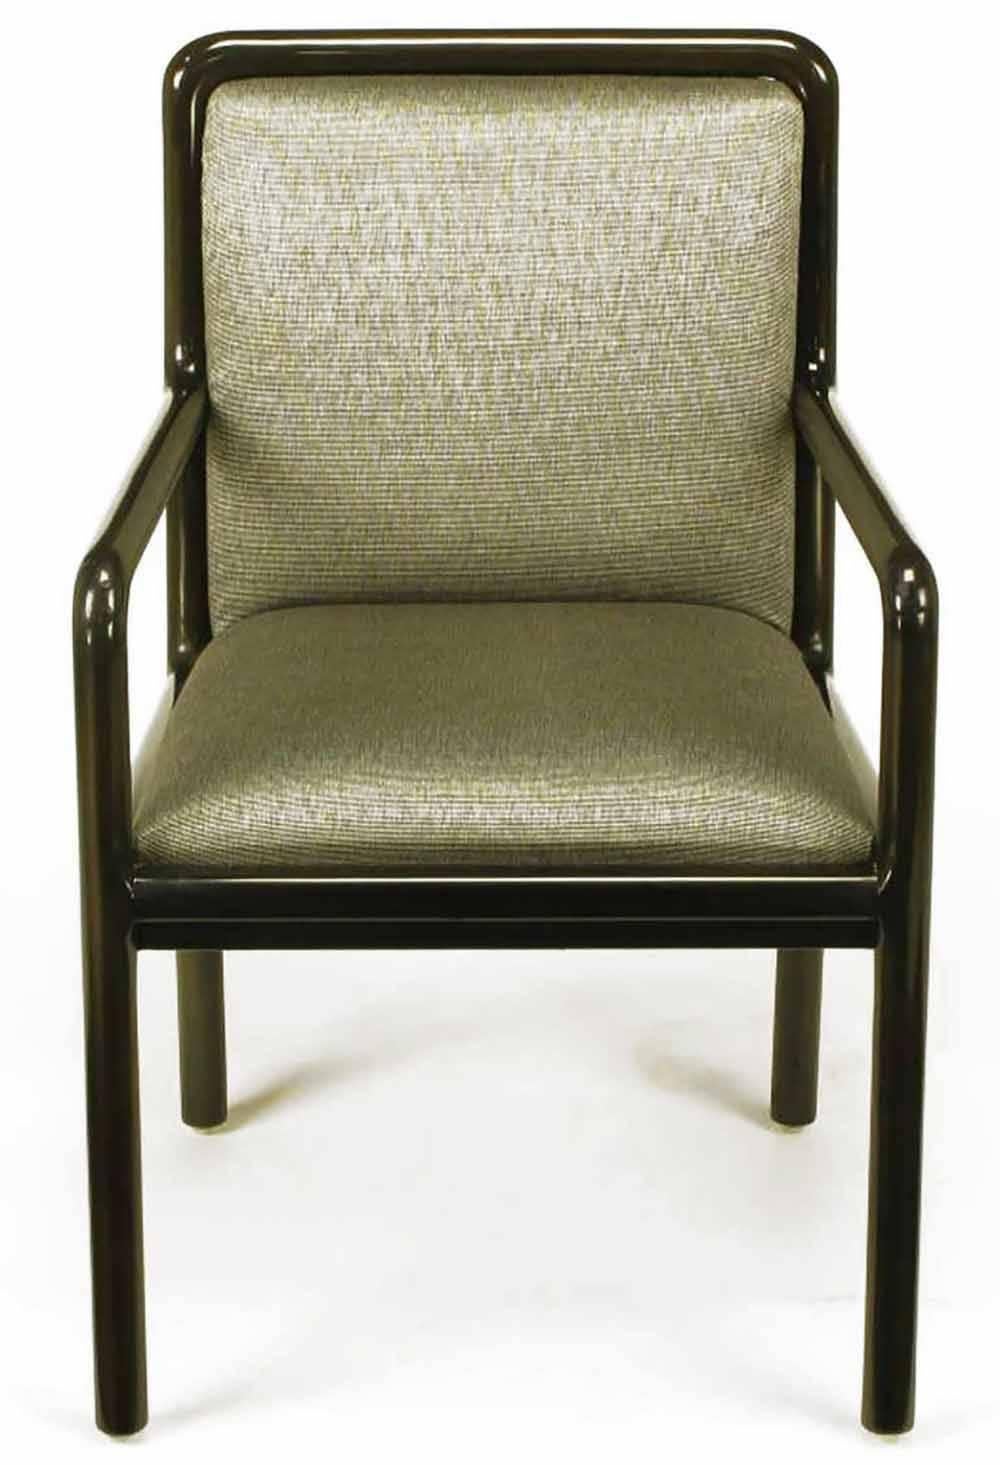 Four Martin Brattrud armed dining chairs. Wood frames are radius and ebonized to a dark chocolate brown gloss. Upholstered in the original heathered grey chintz. Brattrud is a custom furniture manufacturer from Gardena California that has been in